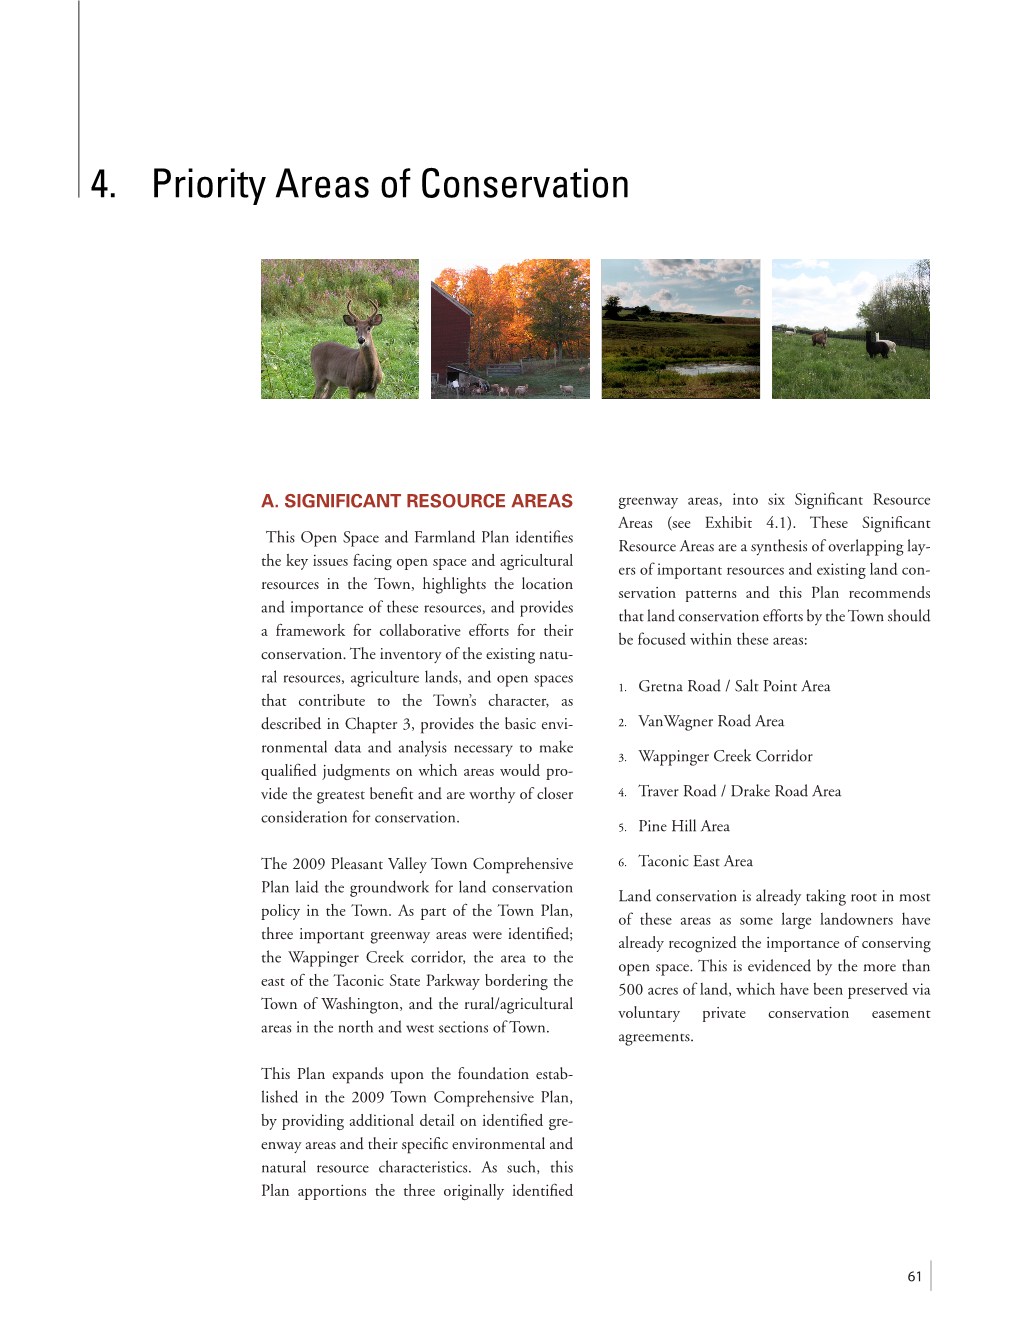 Priority Areas of Conservation